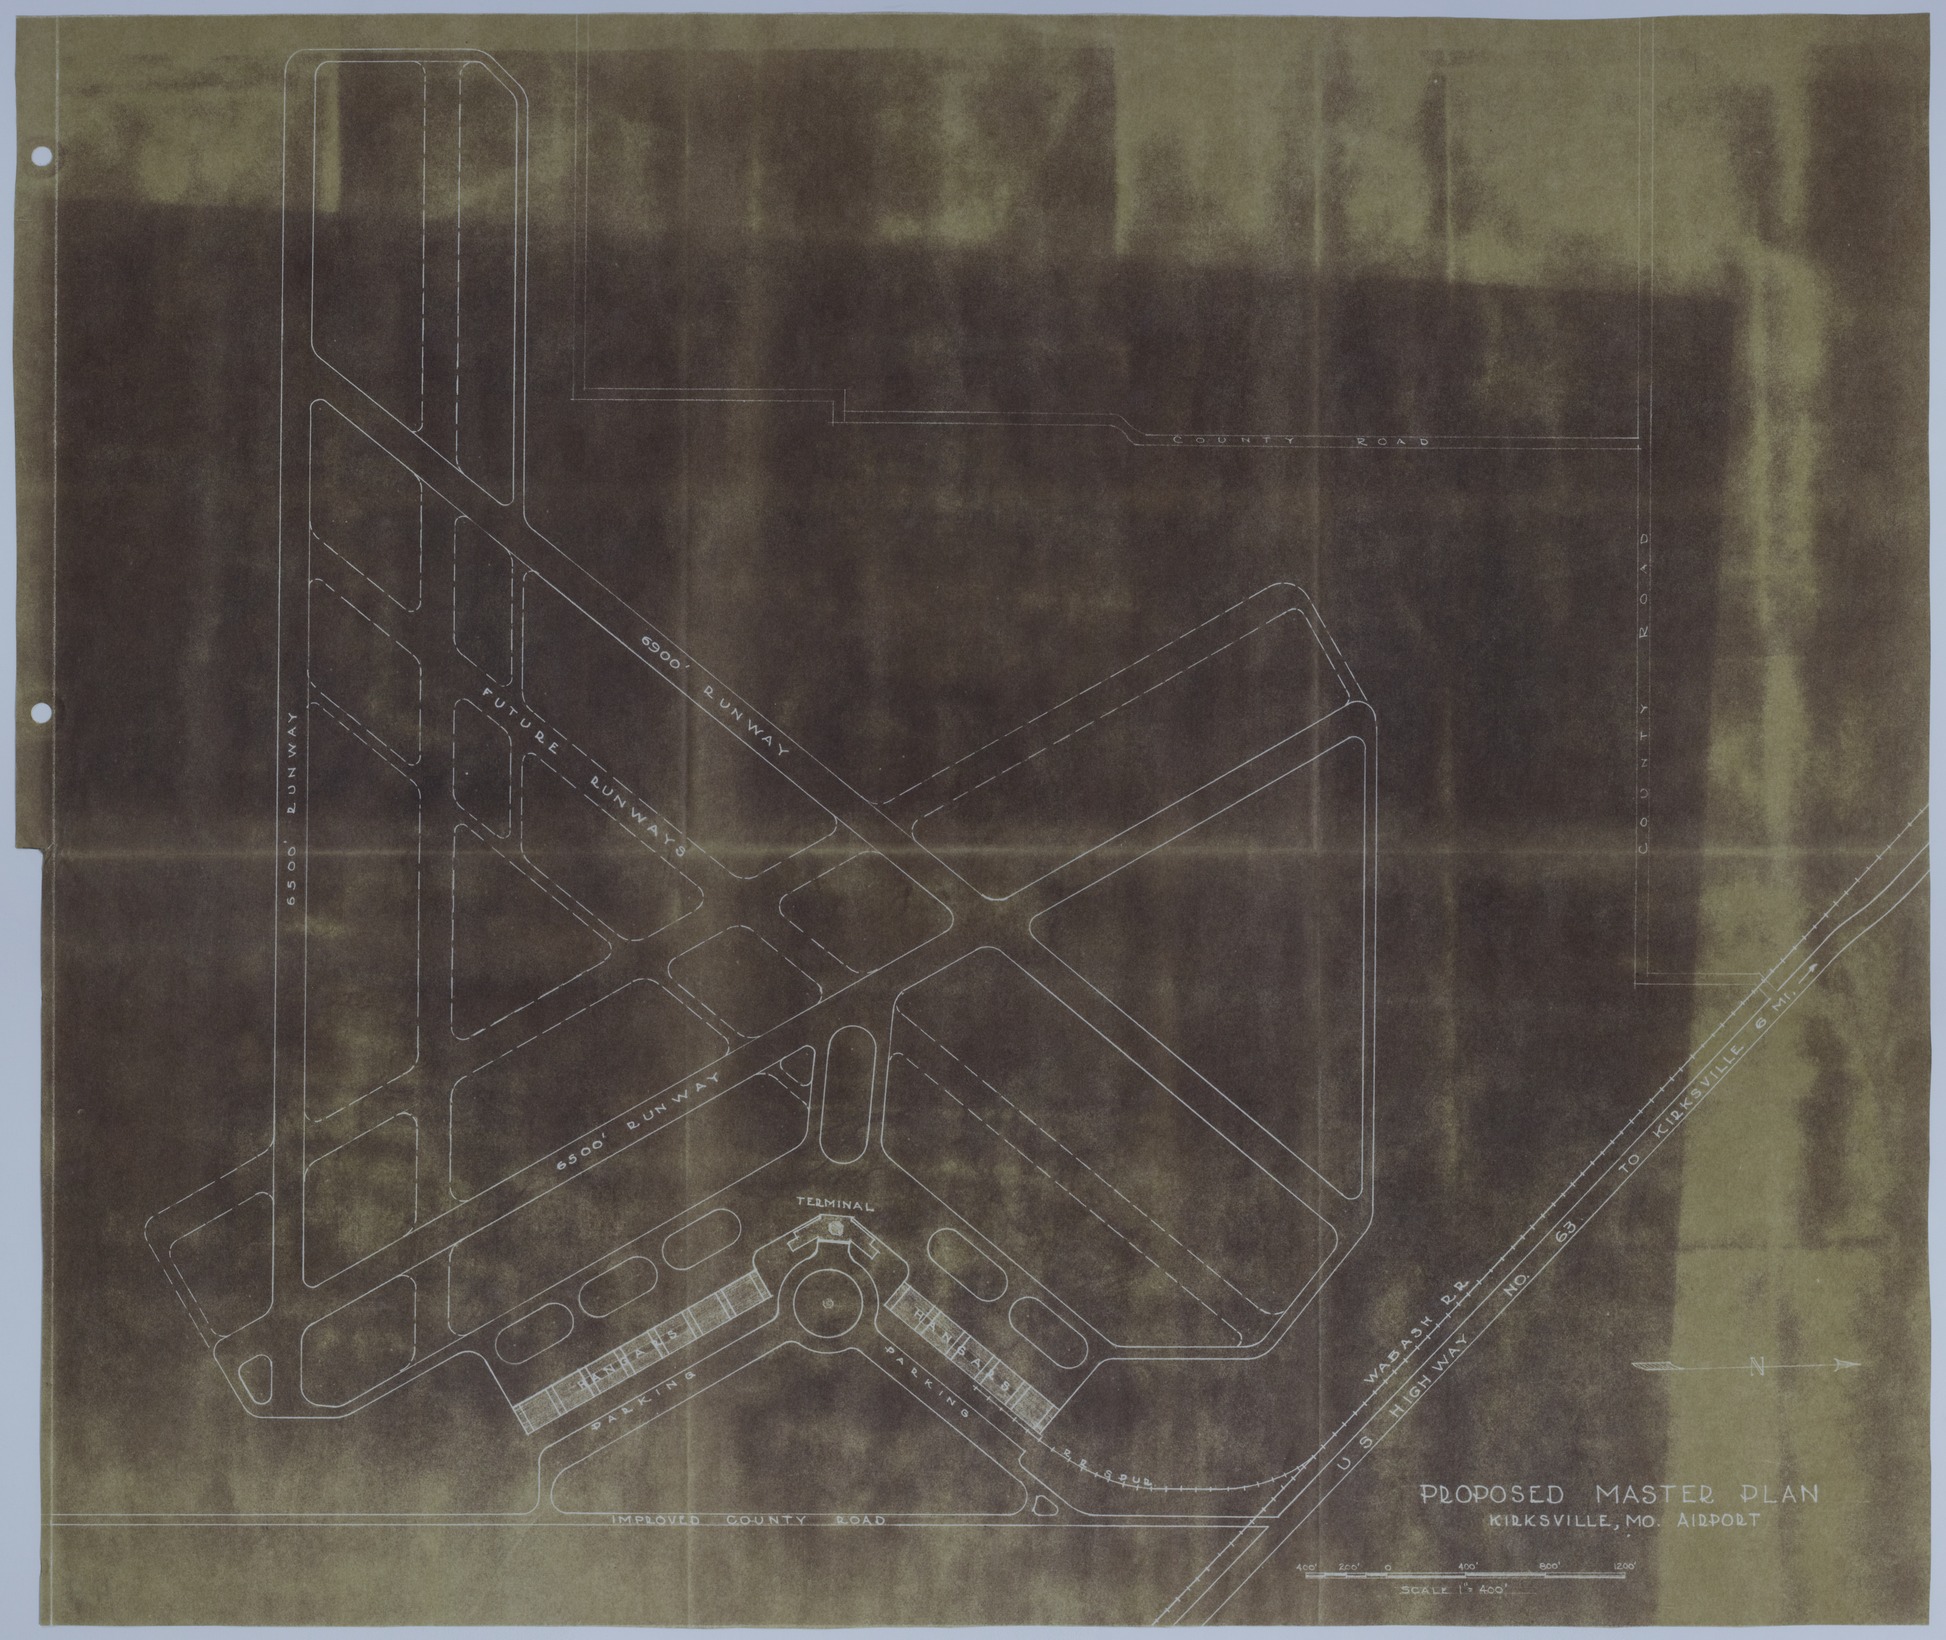 Drawing of the Proposed Development of the Kirksville Municipal Airport